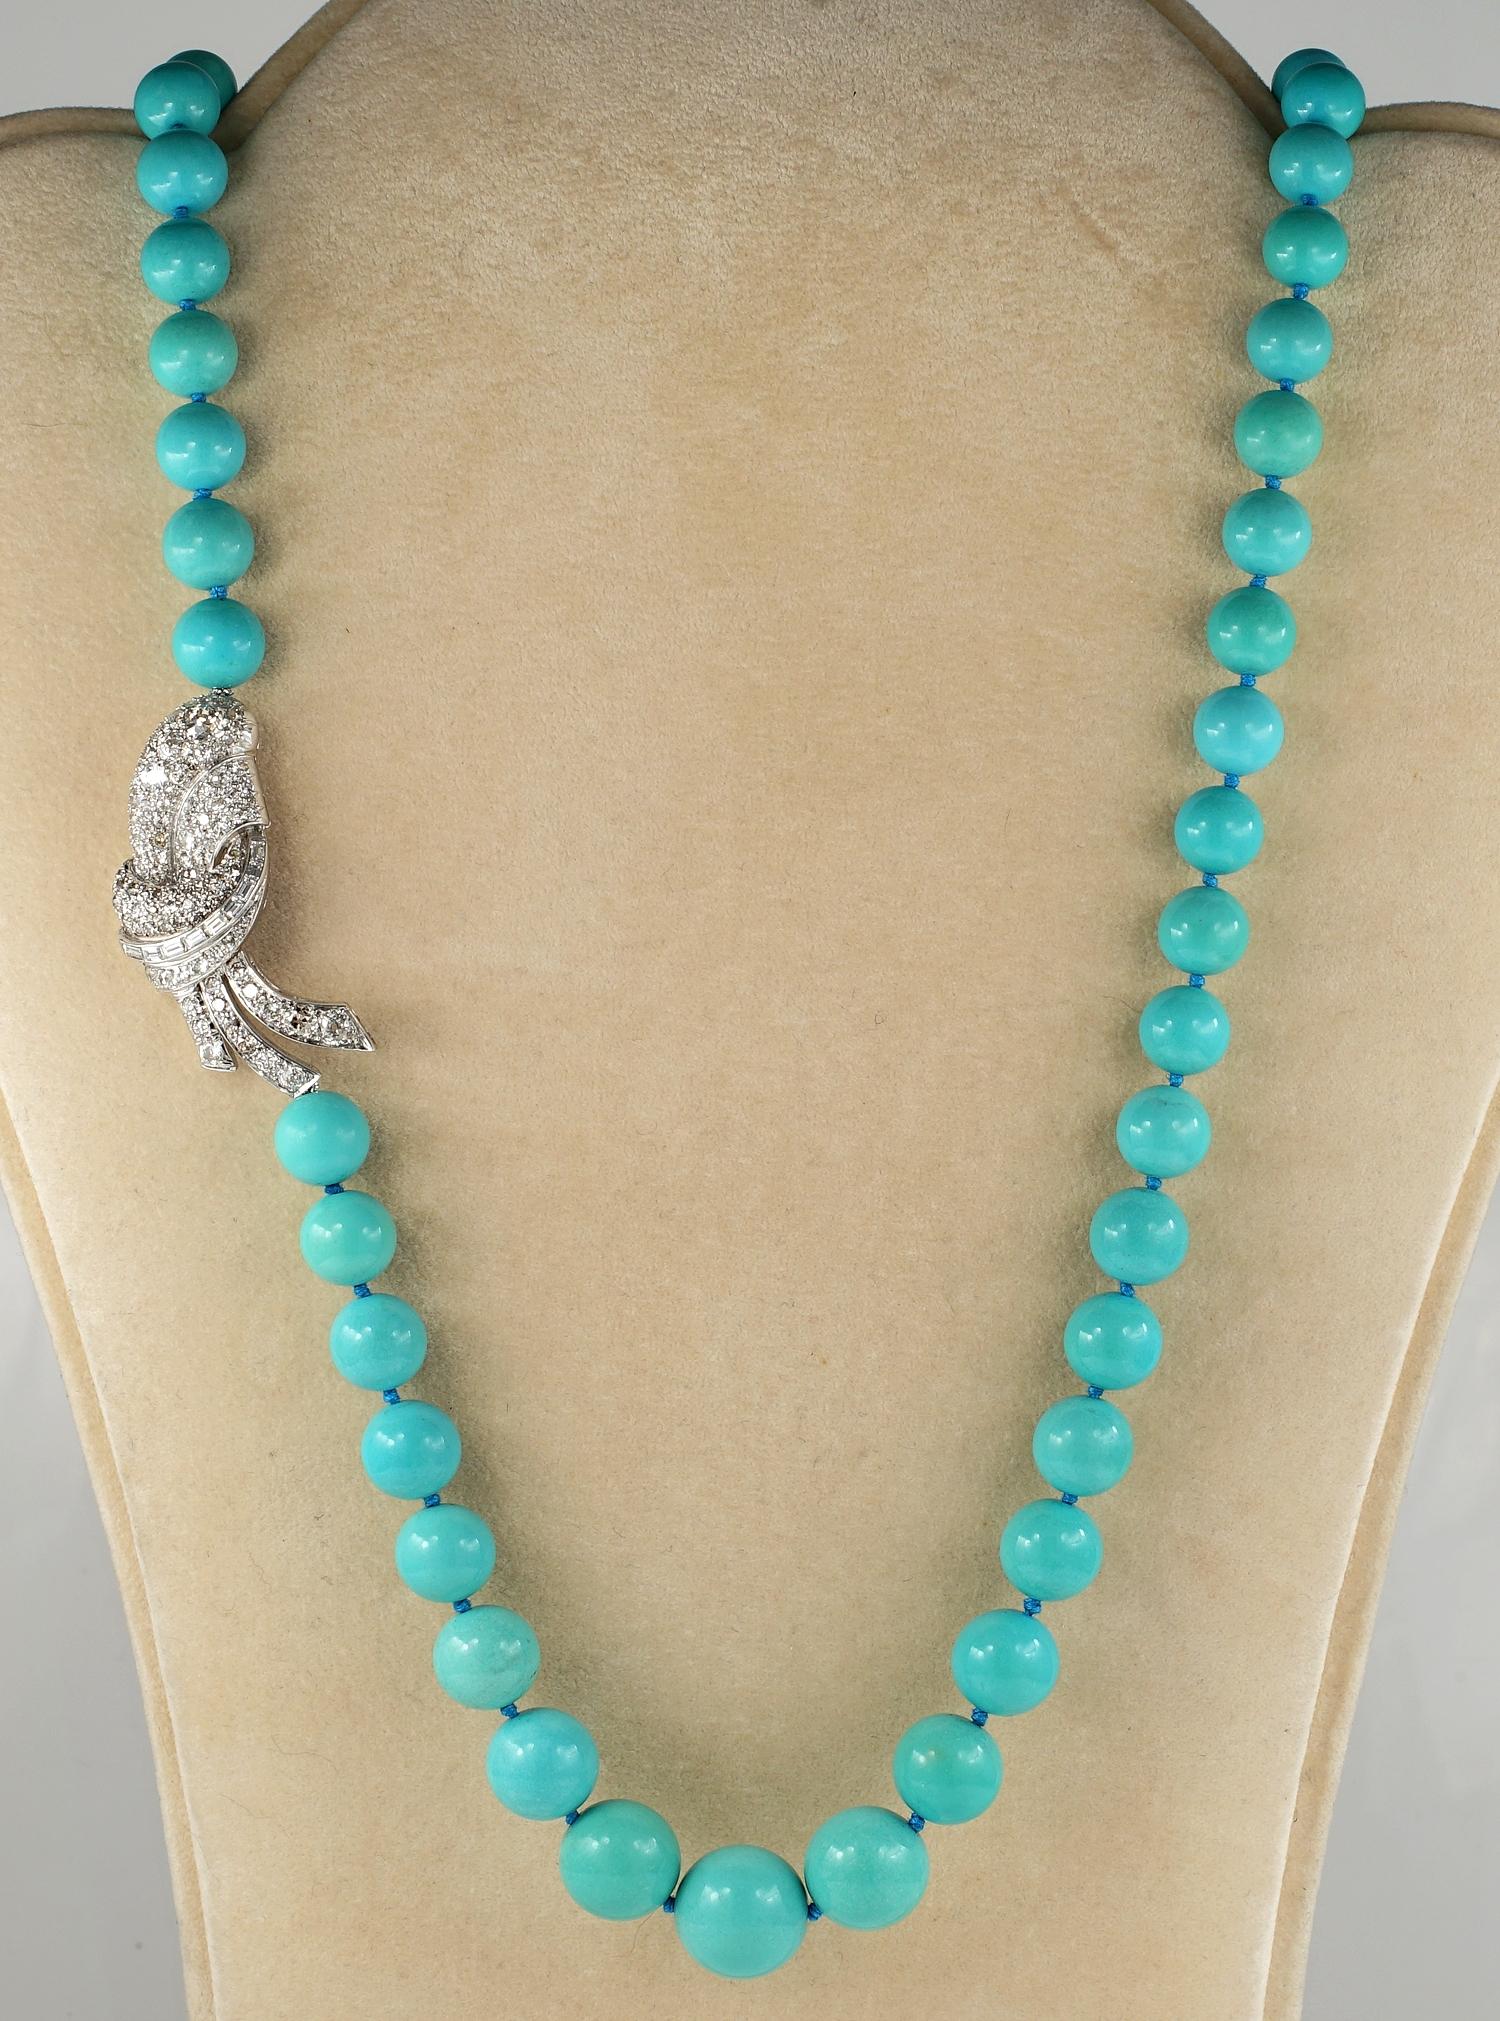 Sky Dream

Exceptional all Natural untreated all Natural Persian Turquoise necklace
1950 ca- graduated in sizes from 11 mm. to 15 mm. beads – which is a rare size; beautiful robin egg colour hue with no black spots, all even colour
Comes in match